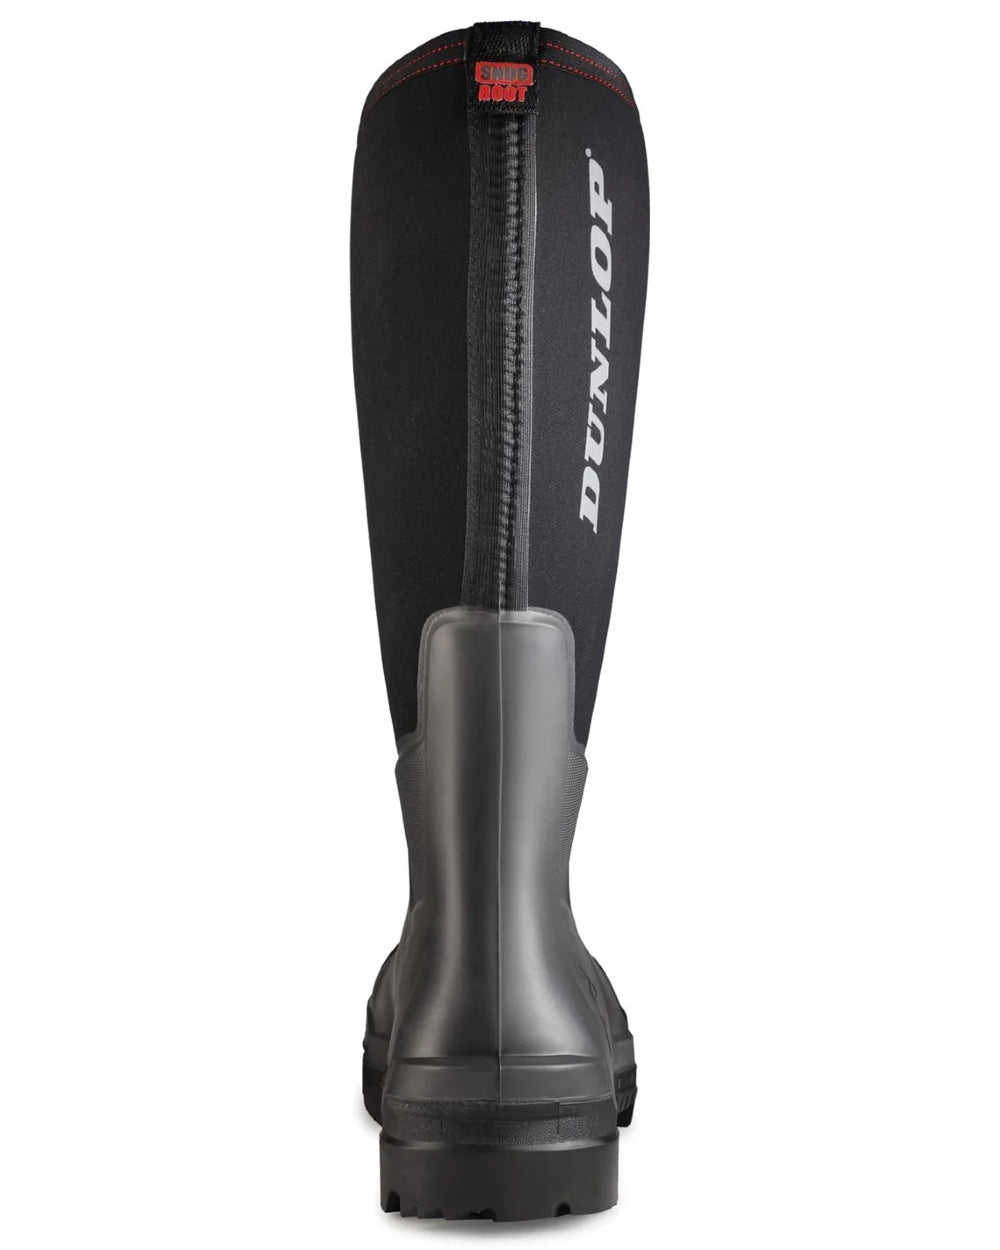 Black coloured Dunlop Snugboot Workpro Full Safety Wellingtons on white background 